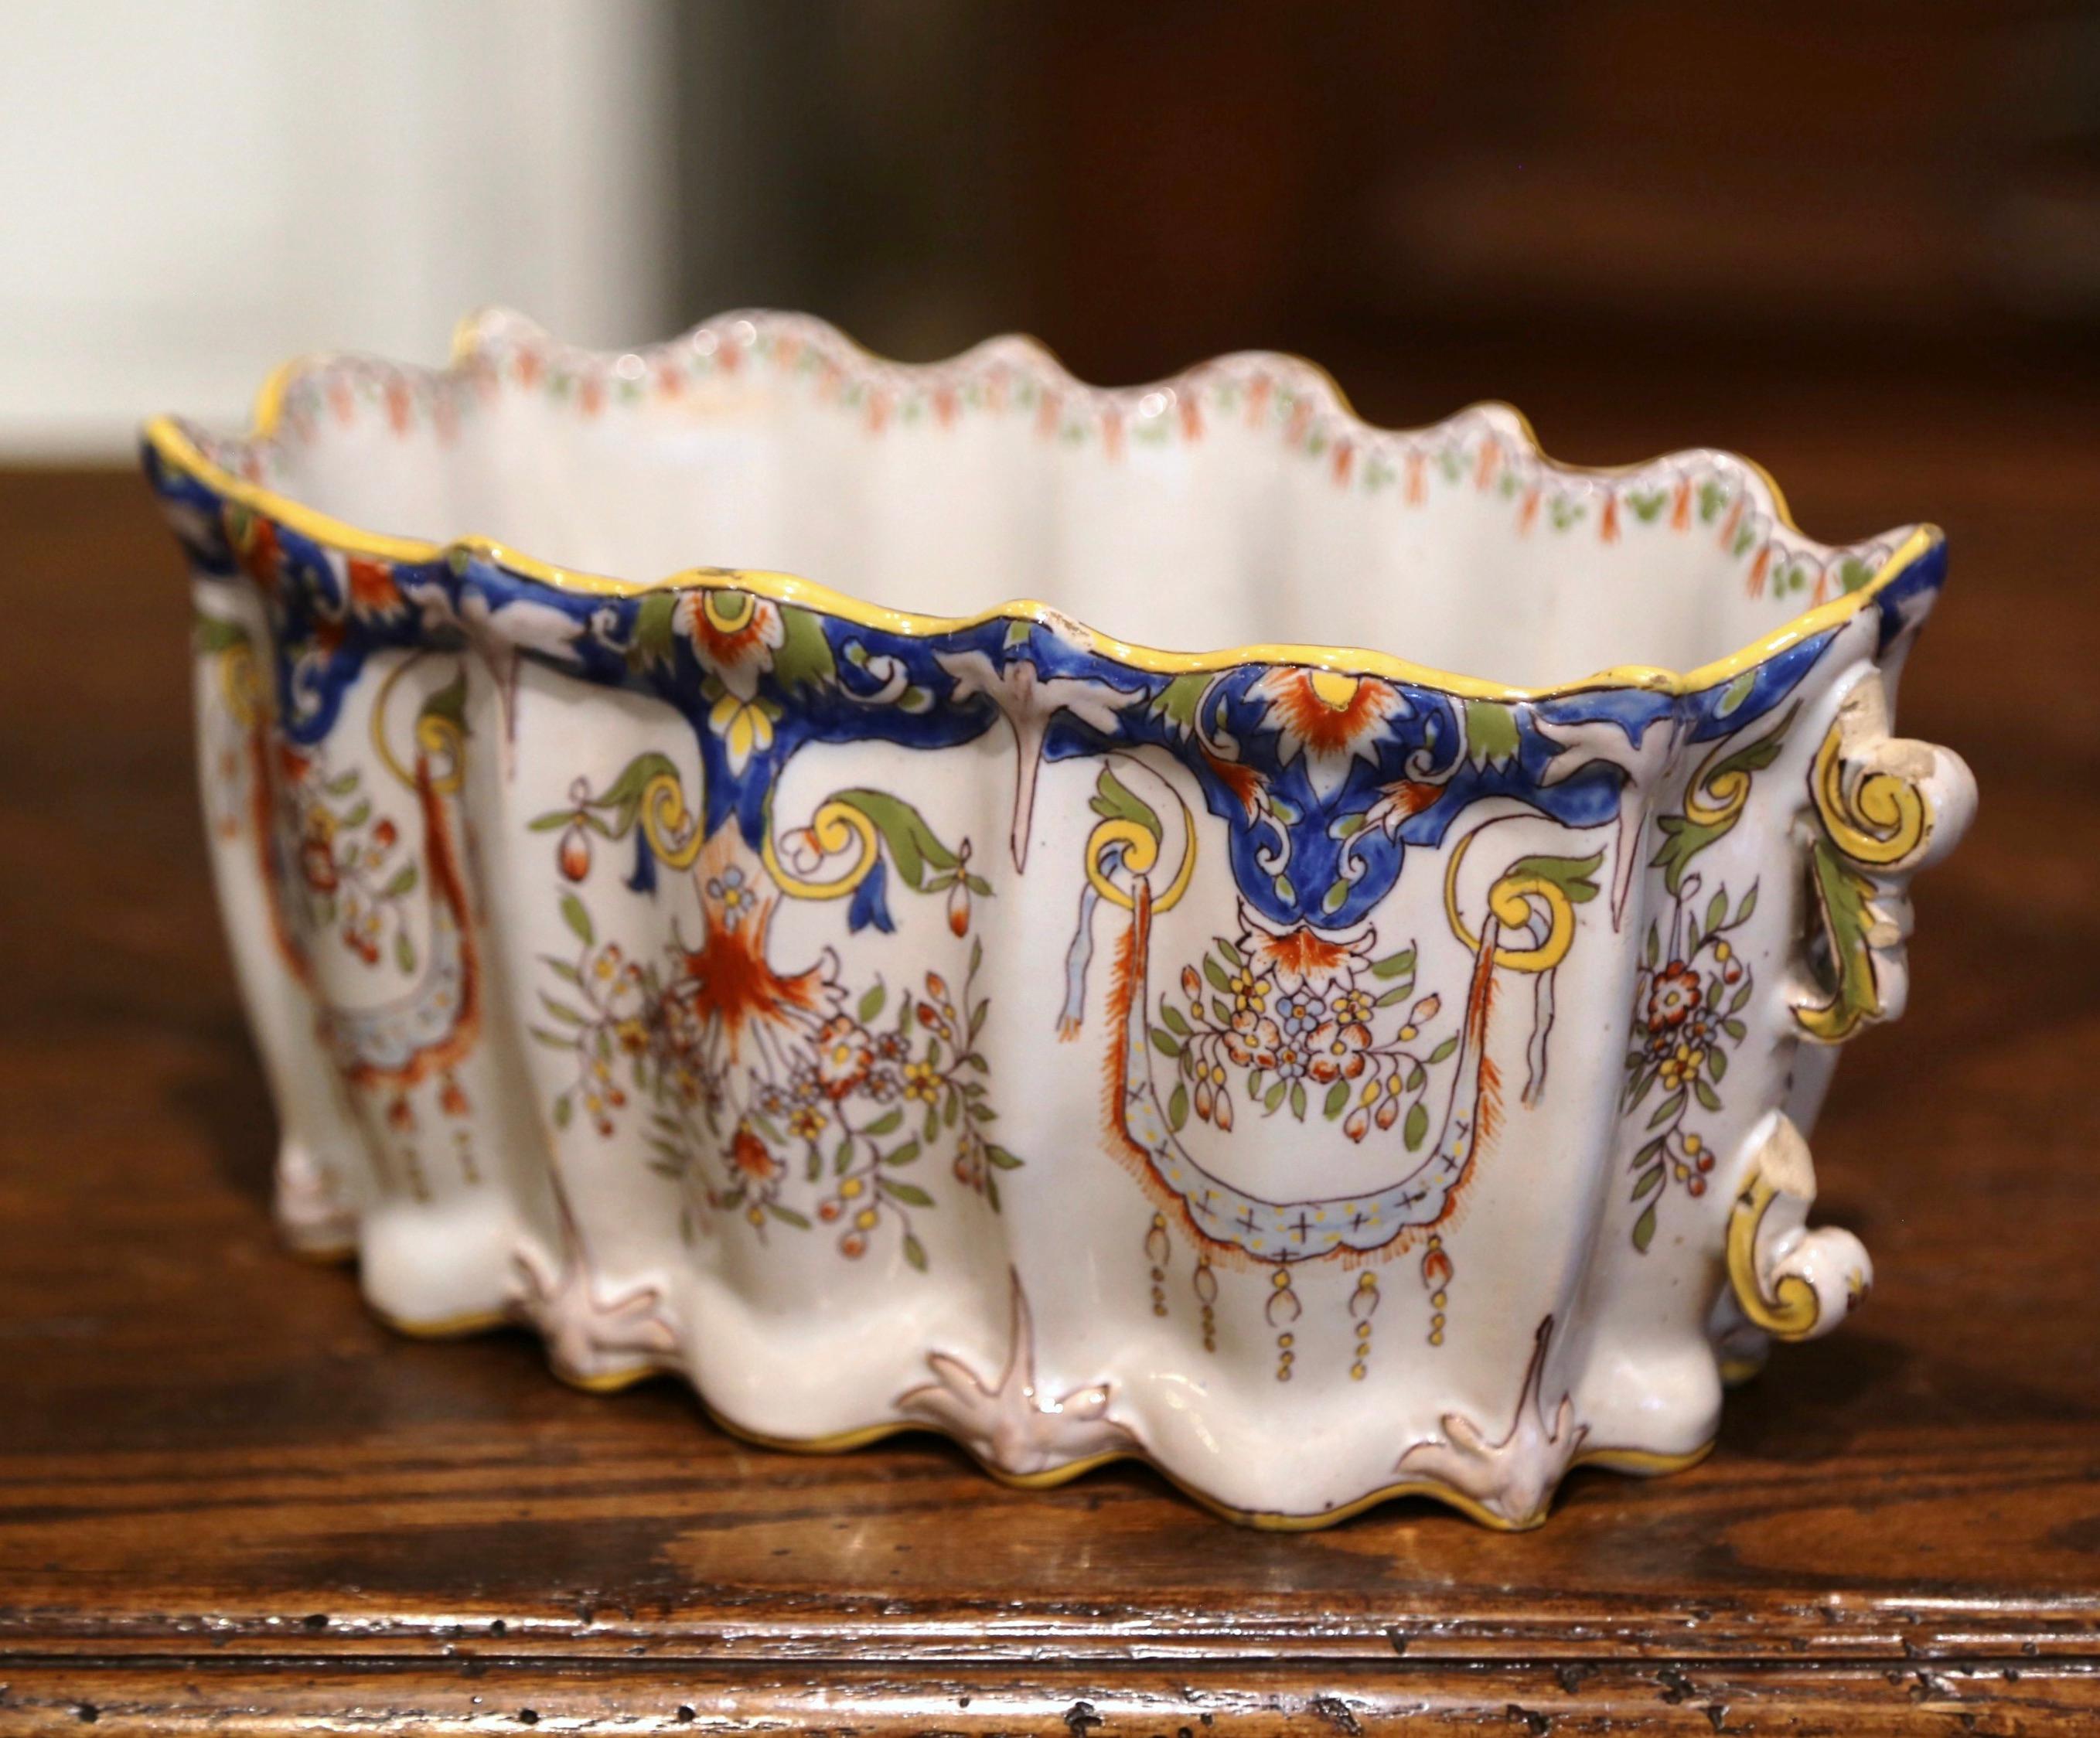 Decorate a mantle, table or buffet with this colorful antique planter. Sculpted in Normandy, France circa 1920, and rectangular in shape, the ceramic jardiniere is dressed with side handles over a scalloped rim at the top, and a scalloped apron at